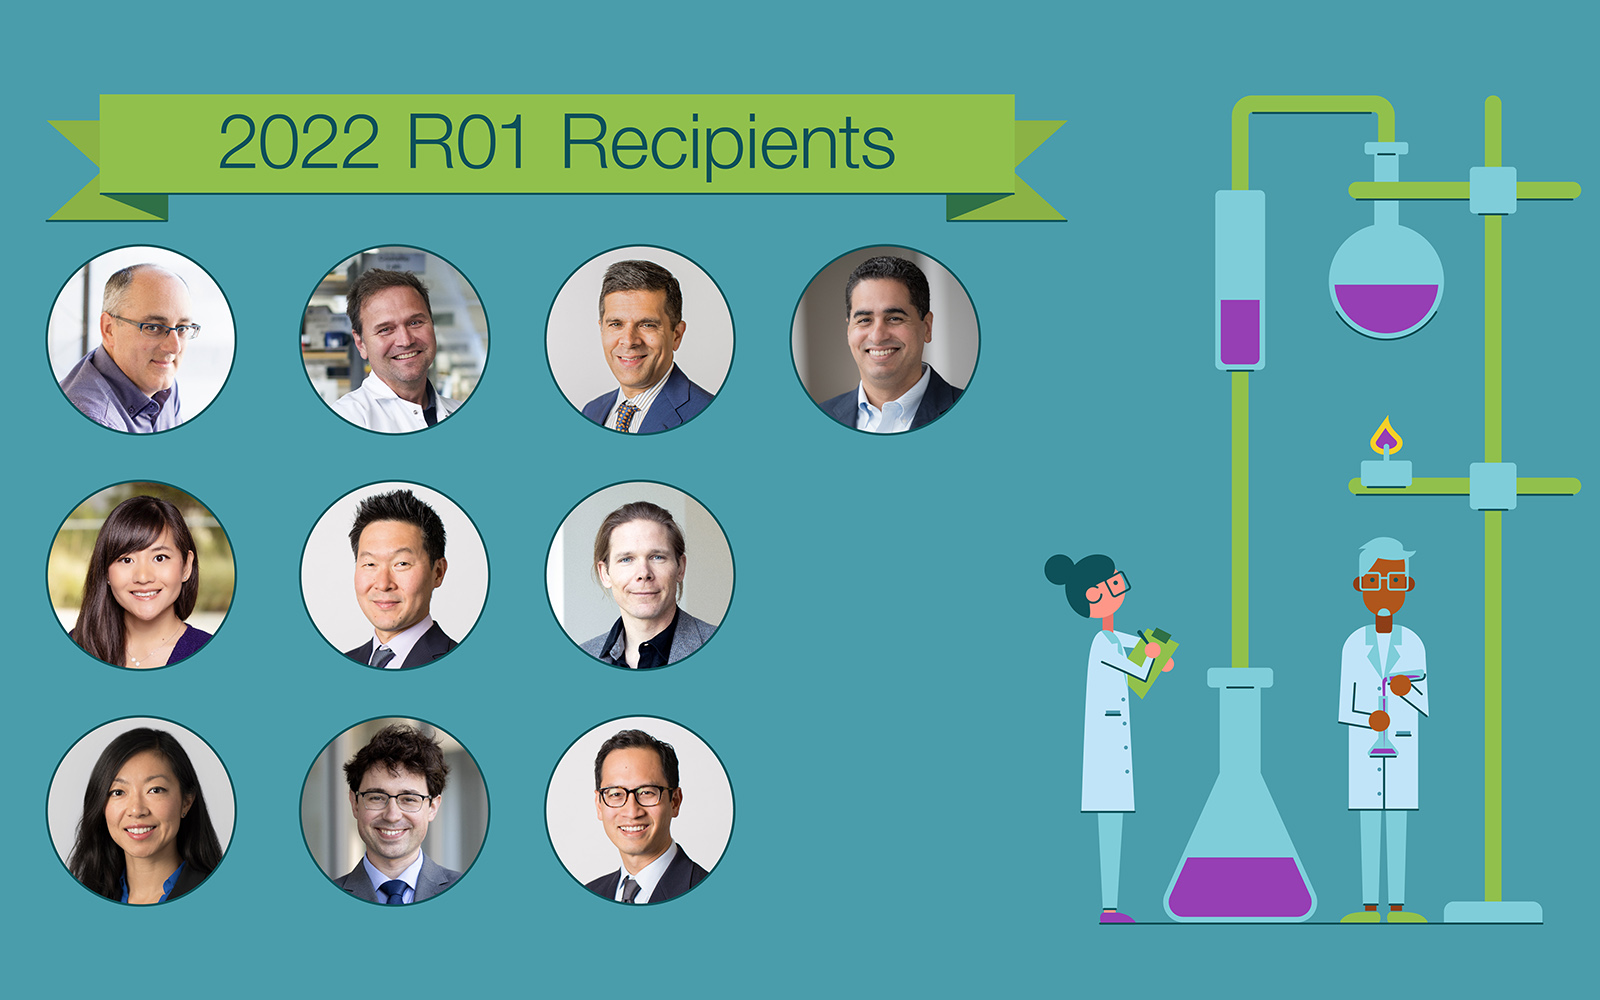 Graphic showing photos of the 10 UCSF neurosurgery faculty members awarded funding next to a cartoon illustration of two scientists surrounded by beakers and flasks